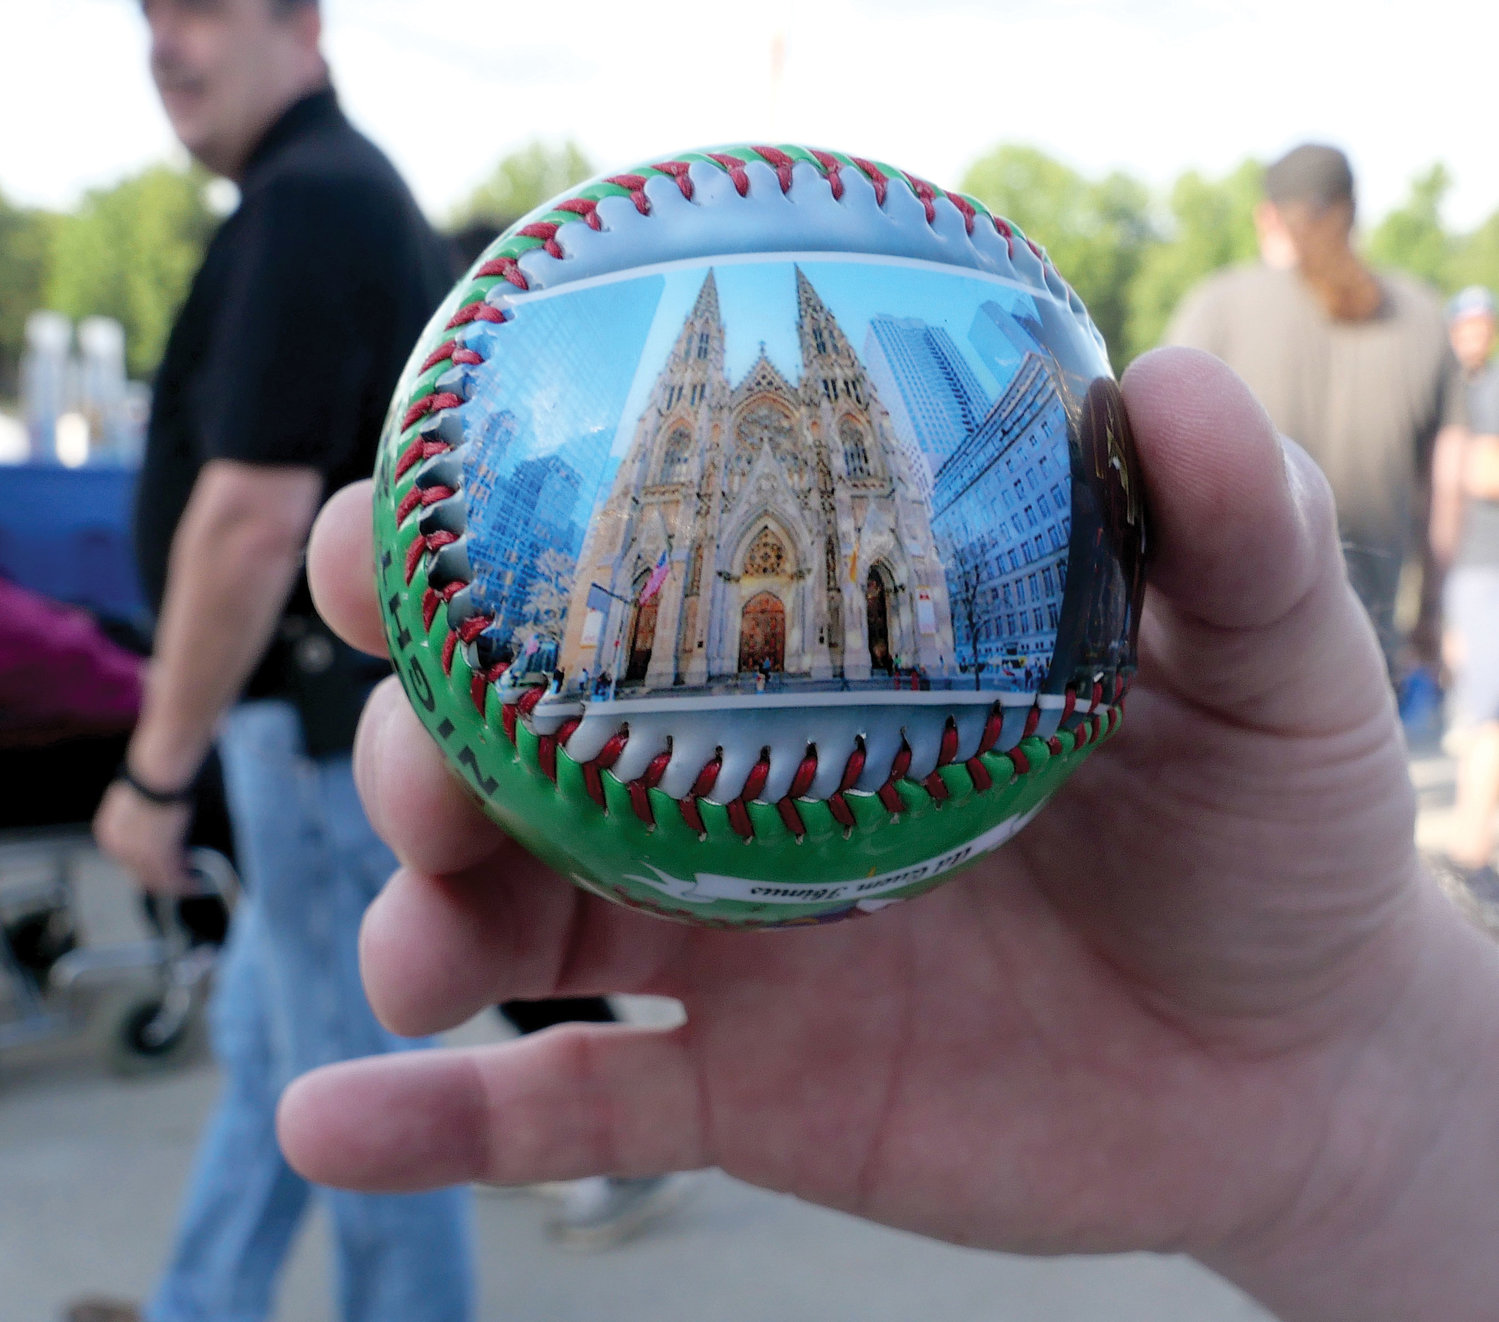 A commemorative baseball, which was given to fans, features an image of St. Patrick’s Cathedral.